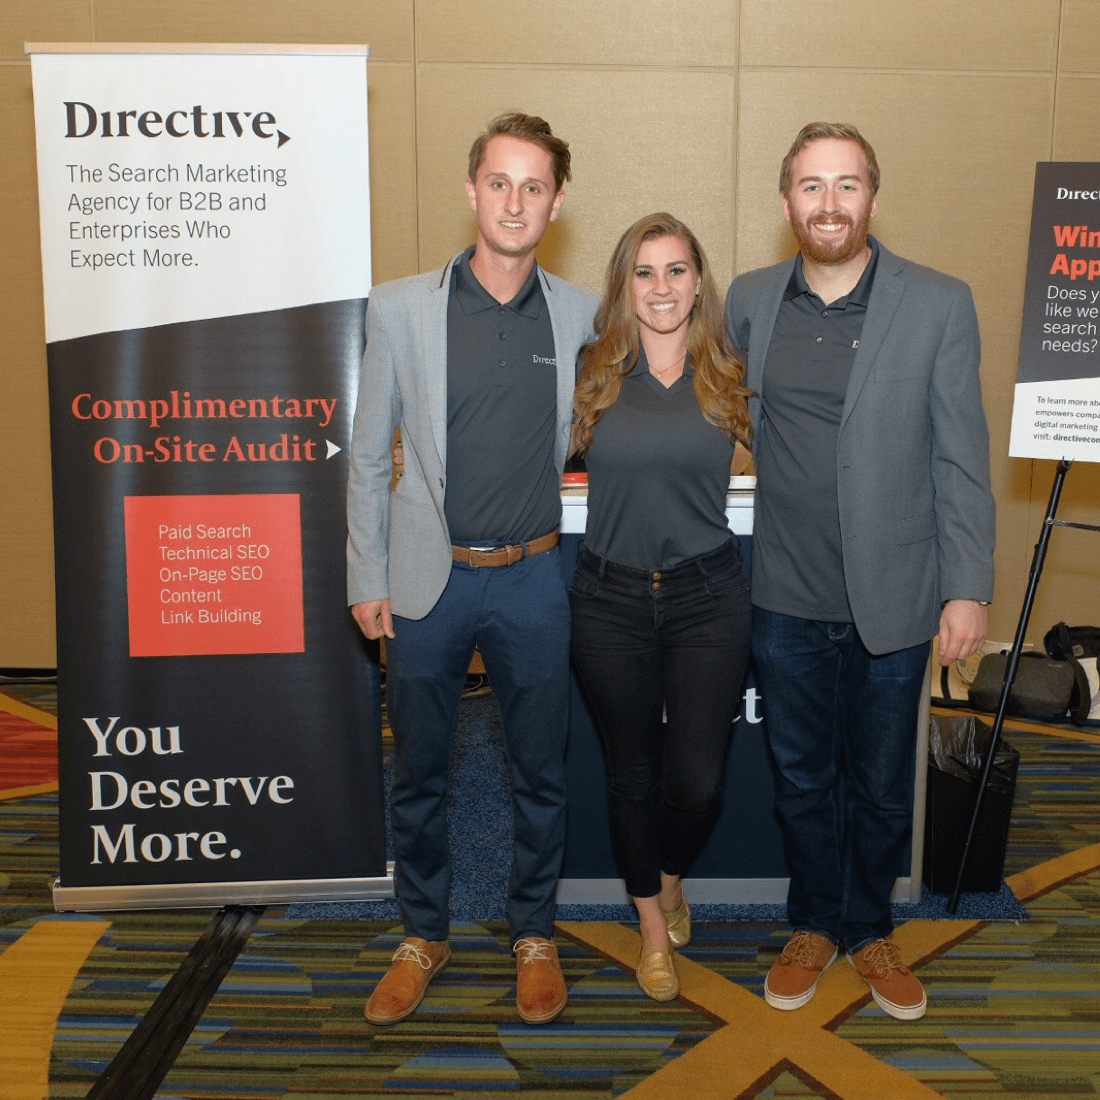 Members of Directive's growth team at their booth. 